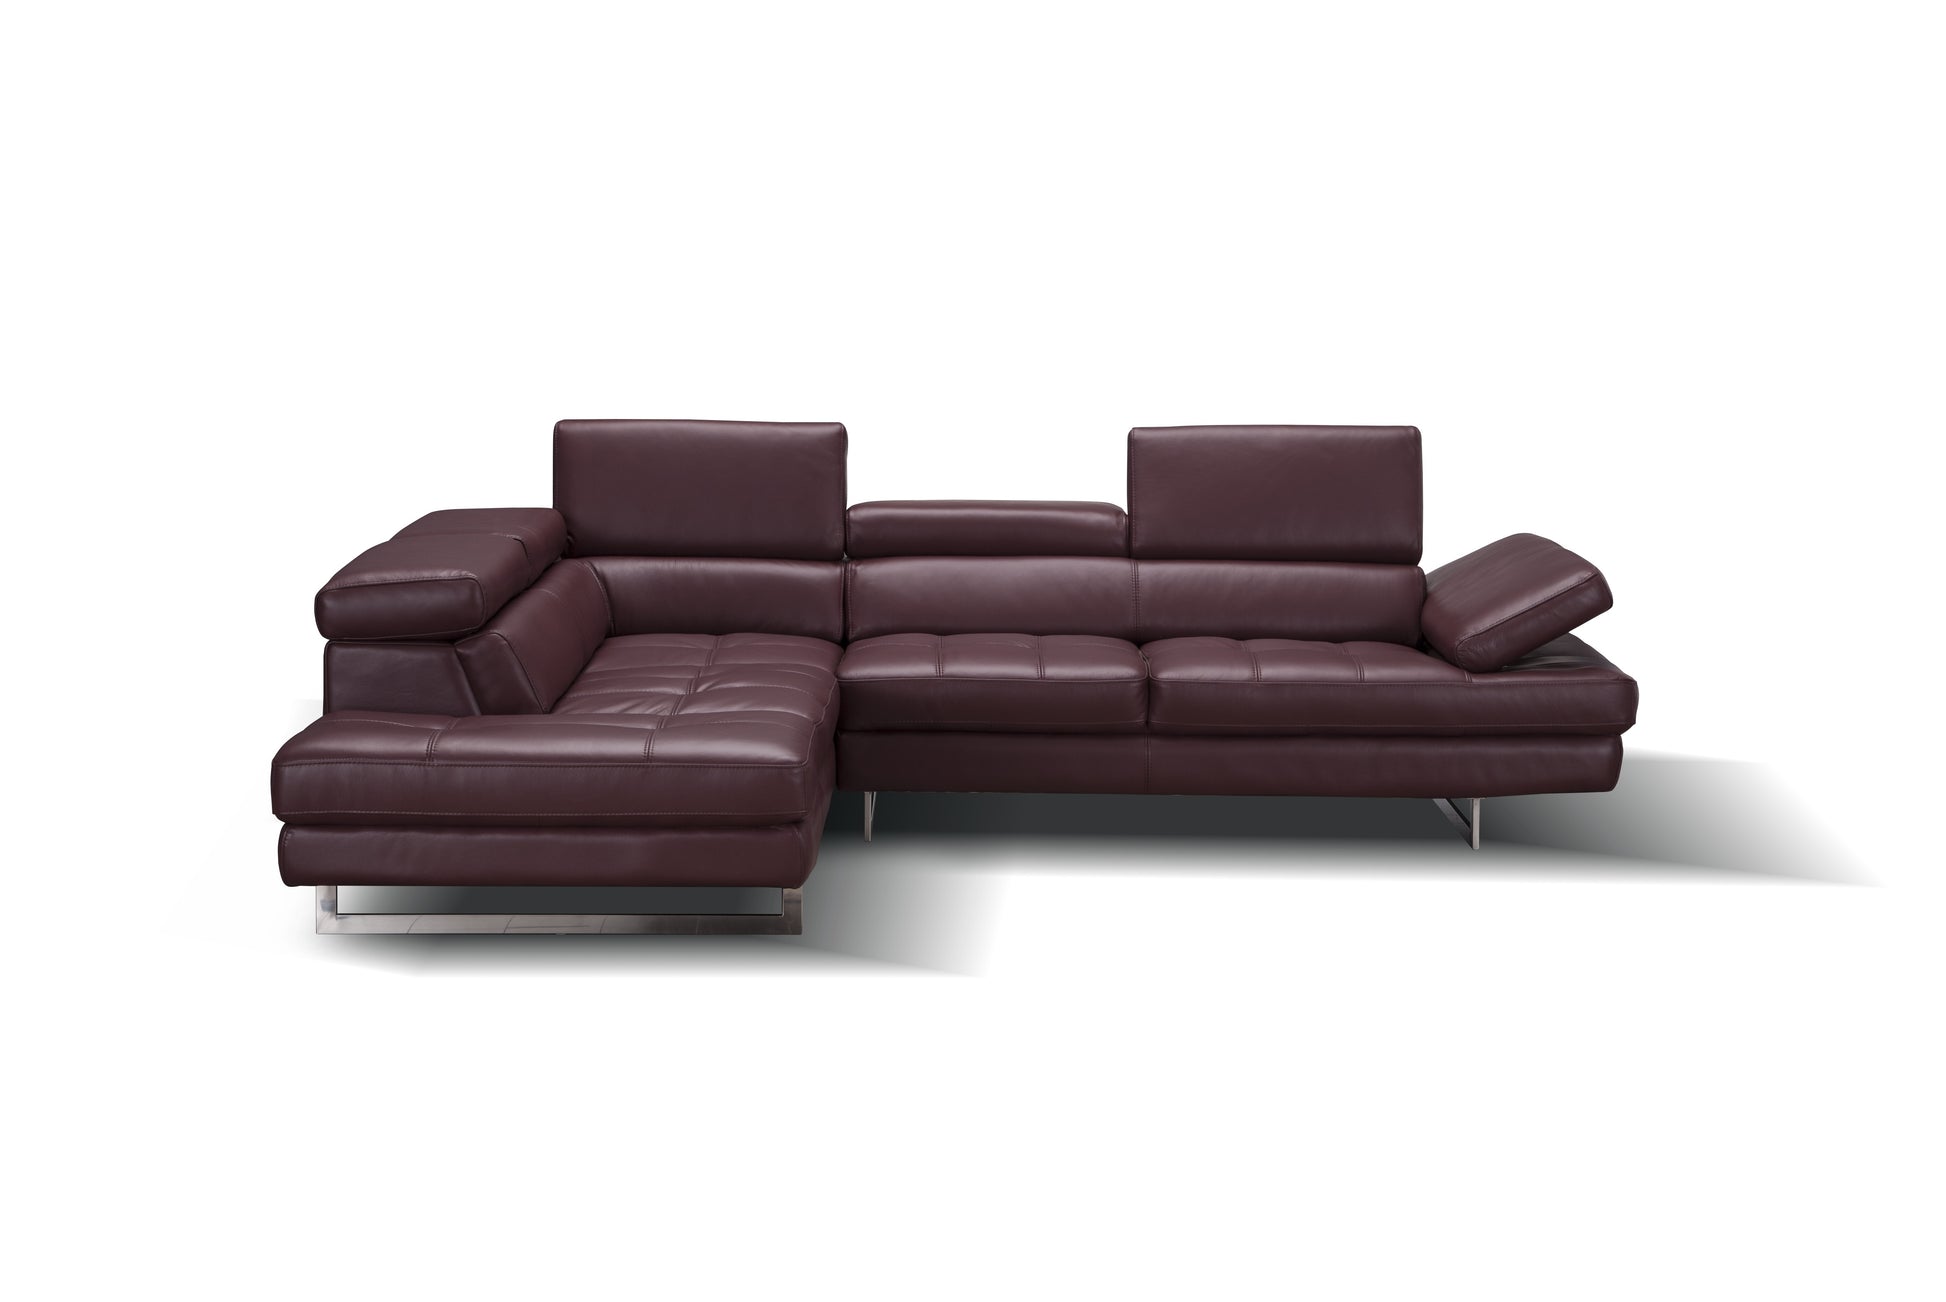 A761 Italian Leather Sectional Sofa Maroon LHF by JM